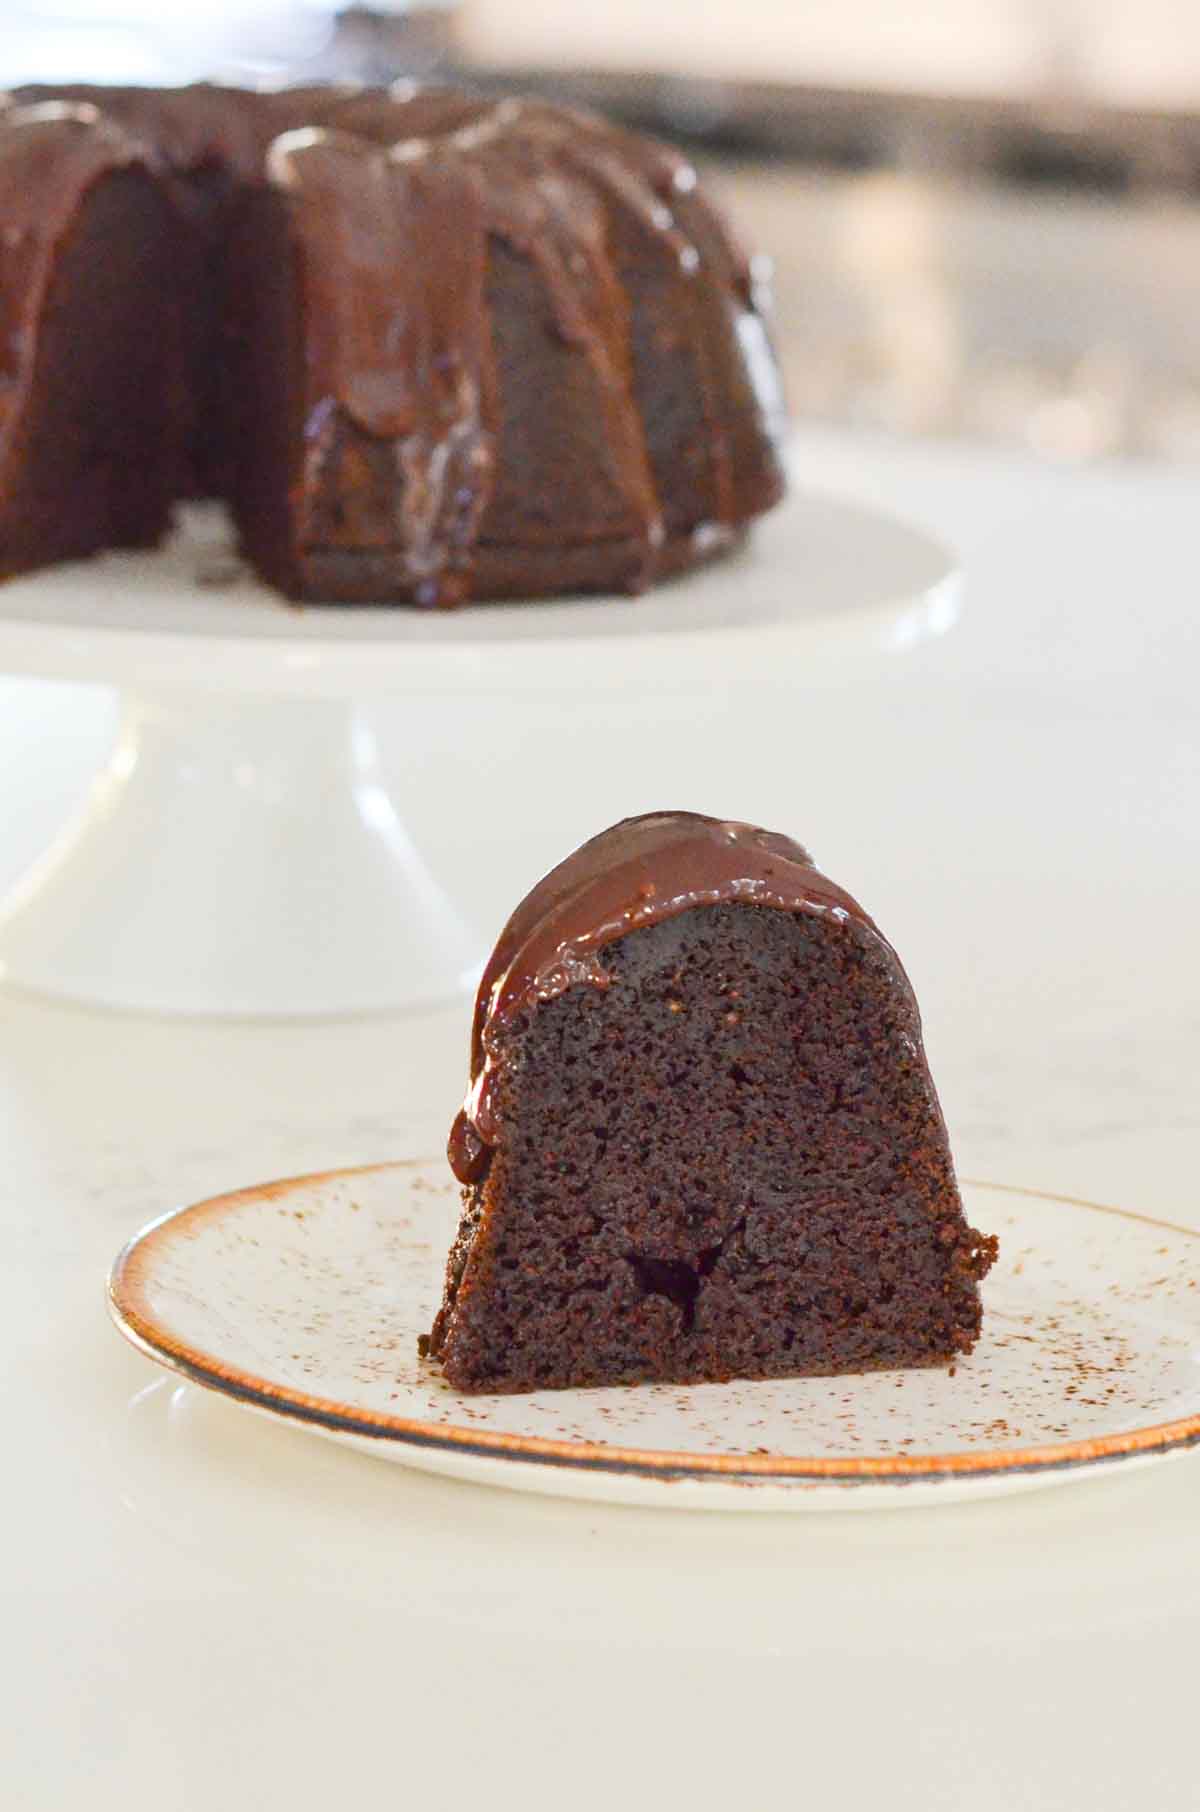 A side shot of a slice of Chocolate Bundt Cake on a plate with the whole cake on a white cake stand in the background.